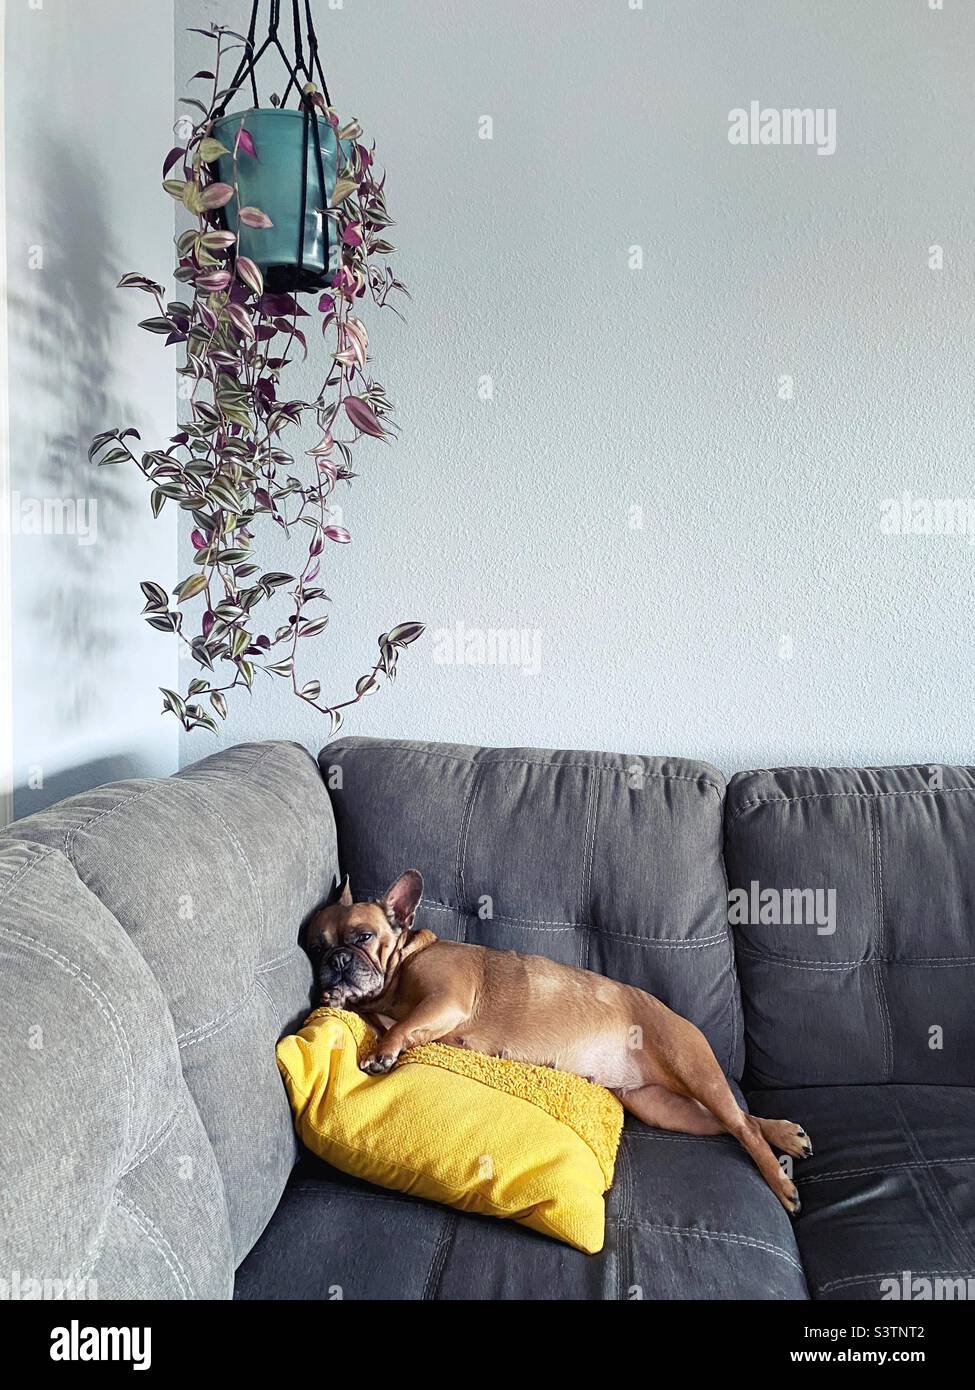 A French bulldog lying on a couch underneath a hanging pot with a silver inch plant trailing down. Stock Photo